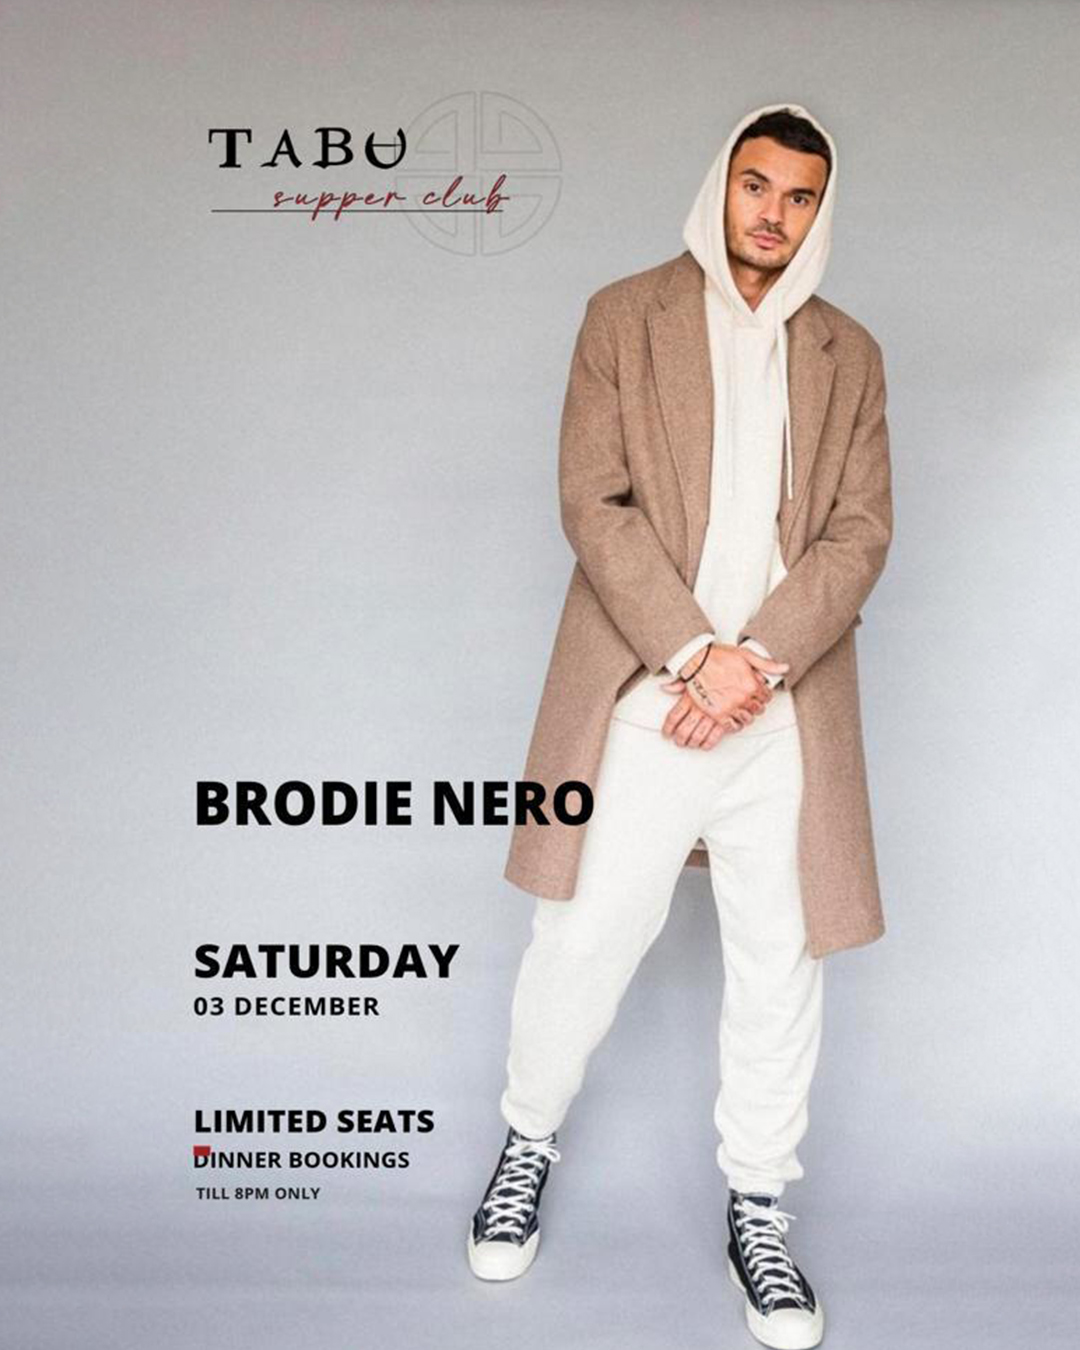 SUPPER CLUB AT TABU WITH BRODIE NERO – SATURDAY DECEMBER 3RD thumbnail image